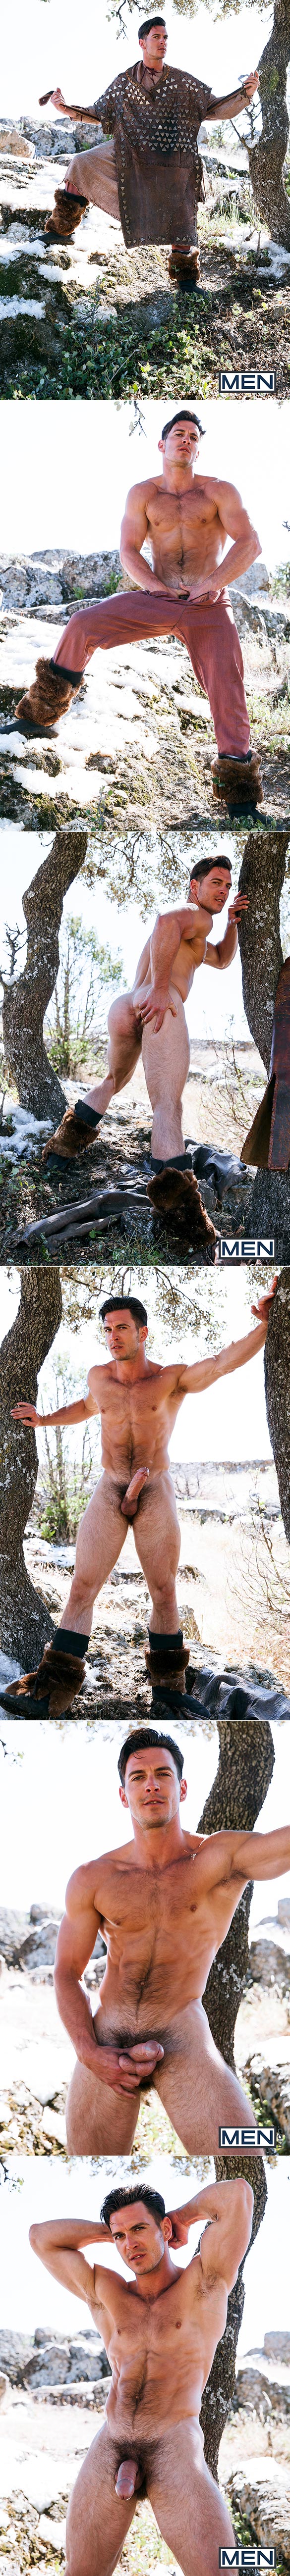 Men.com: Connor Maguire and Paddy O'Brian flip fuck in "Gay of Thrones, Part 5"